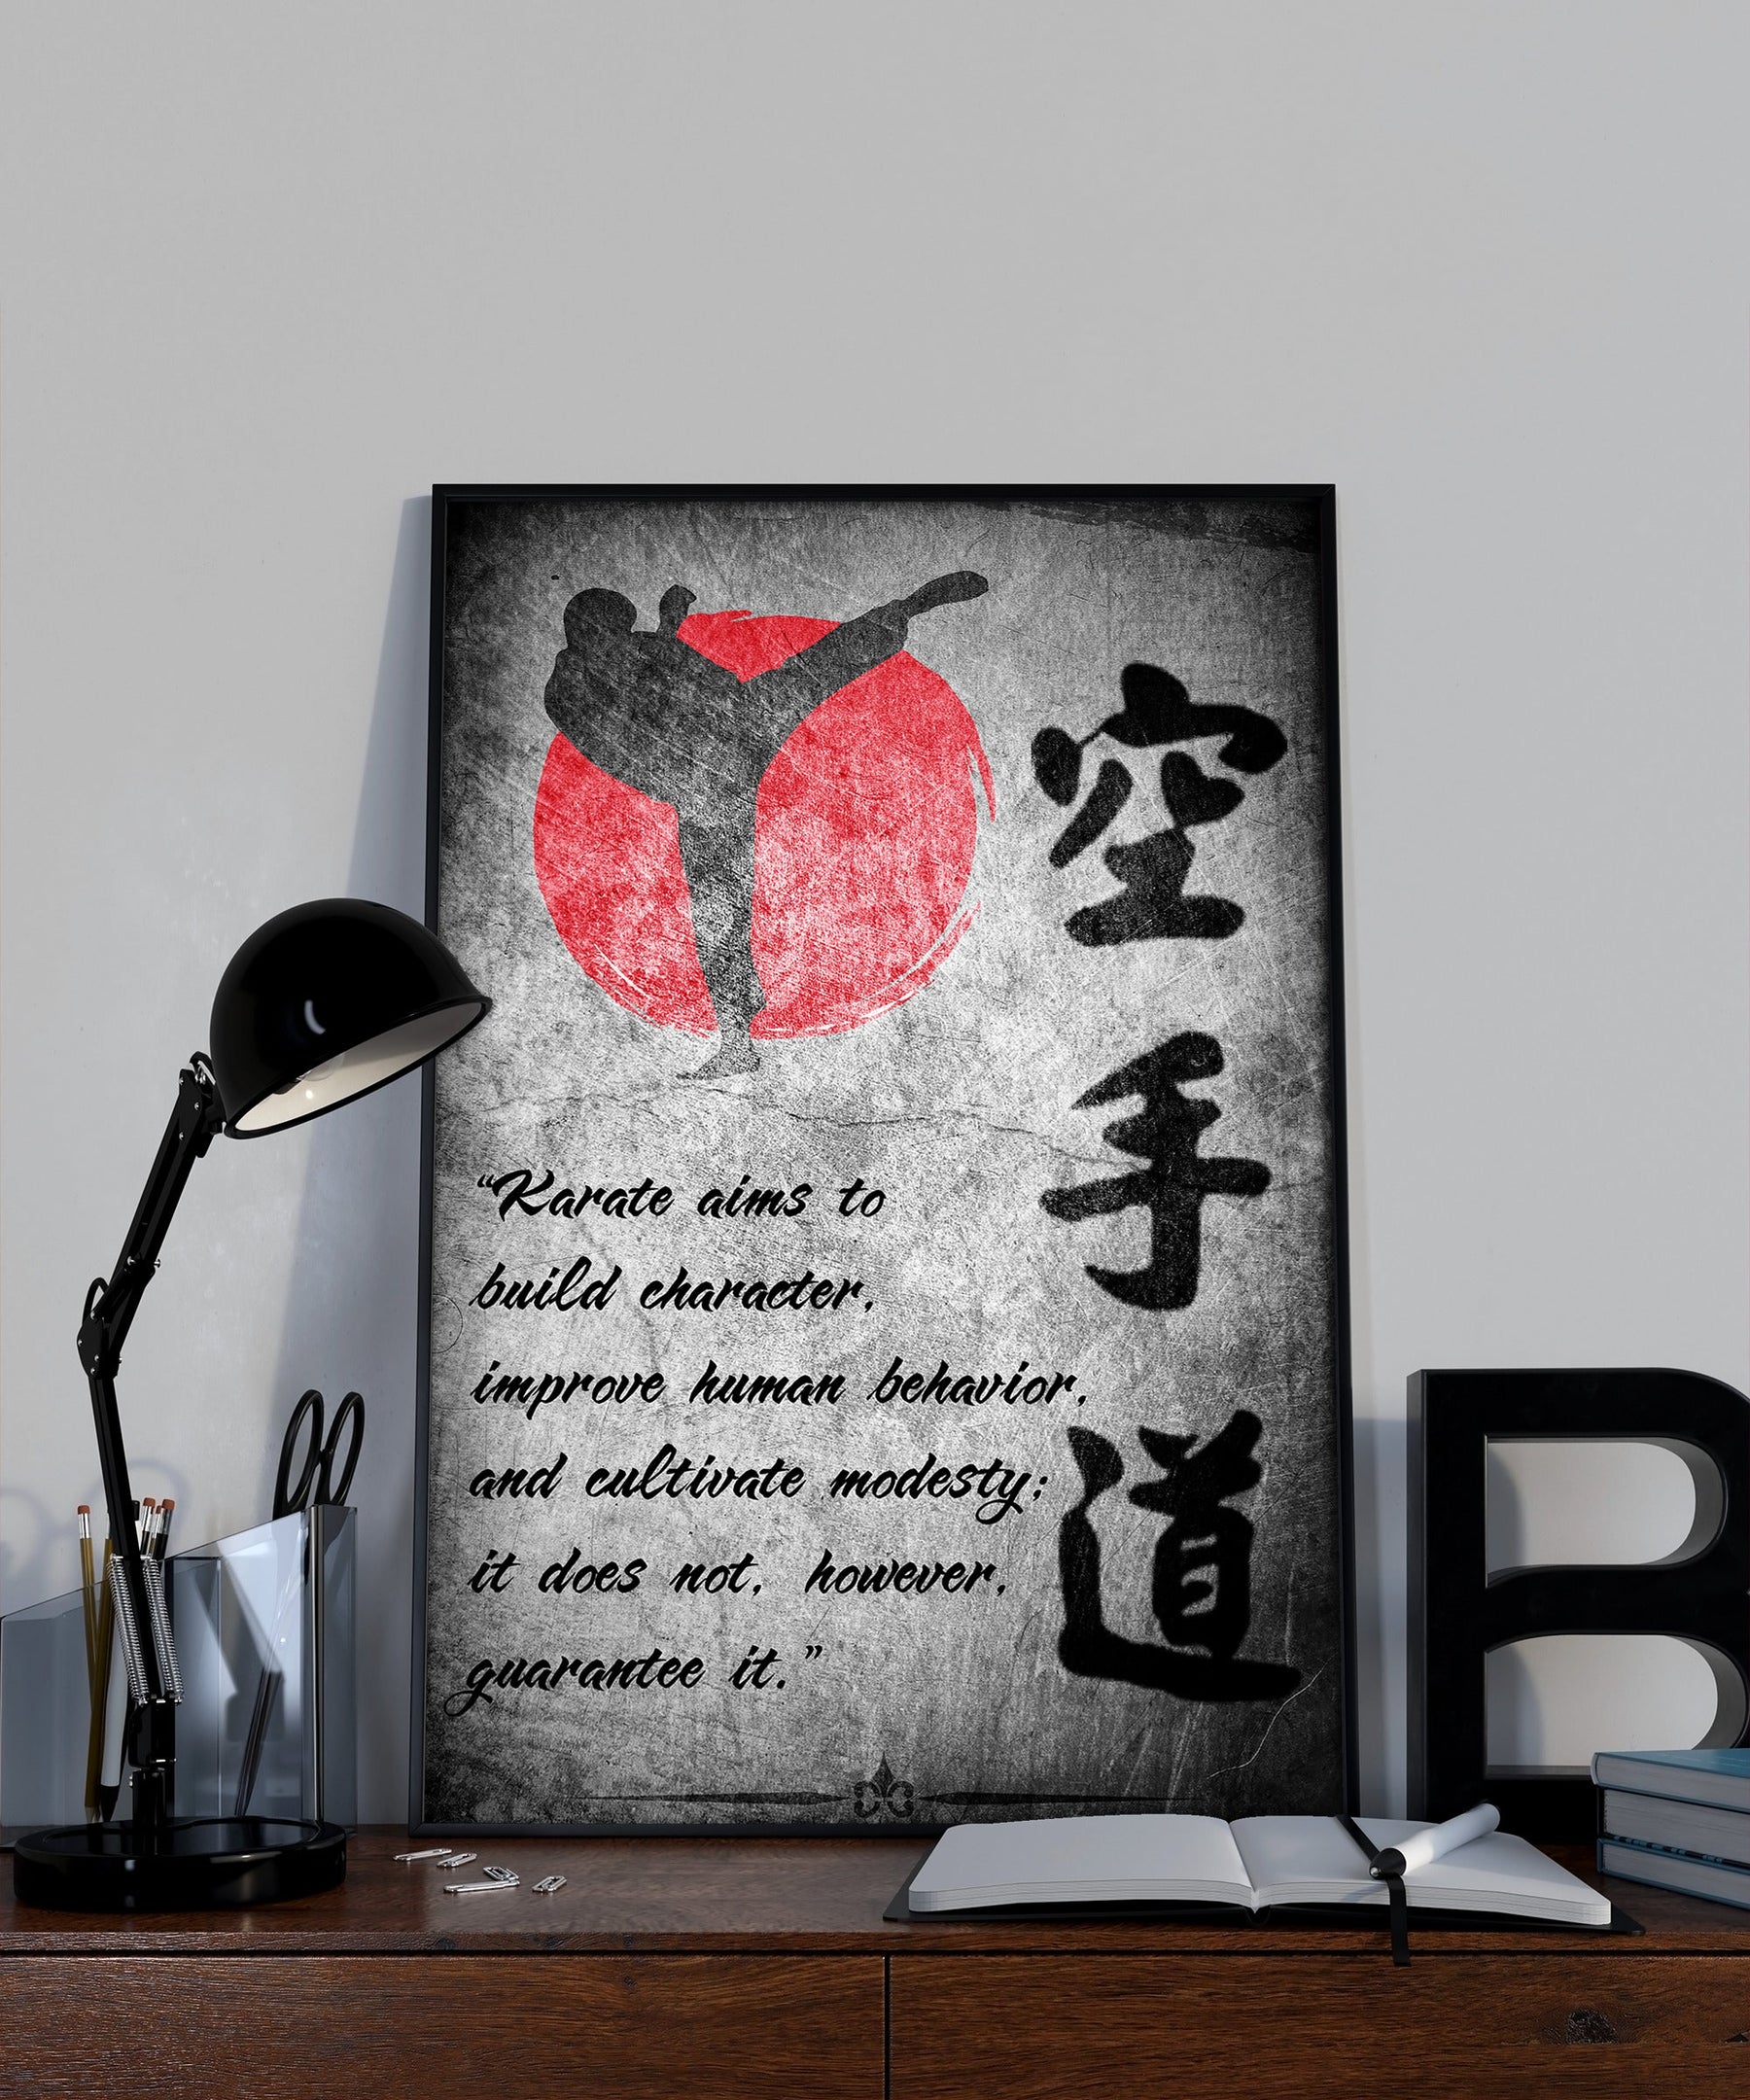 KA020 - Karate Aims To Build Character, Improve Human Behavior, And Cultivate Modesty; It Does Not, However, Guarantee It - Yasuhiro Konishi - Vertical Poster - Vertical Canvas - Karate Poster